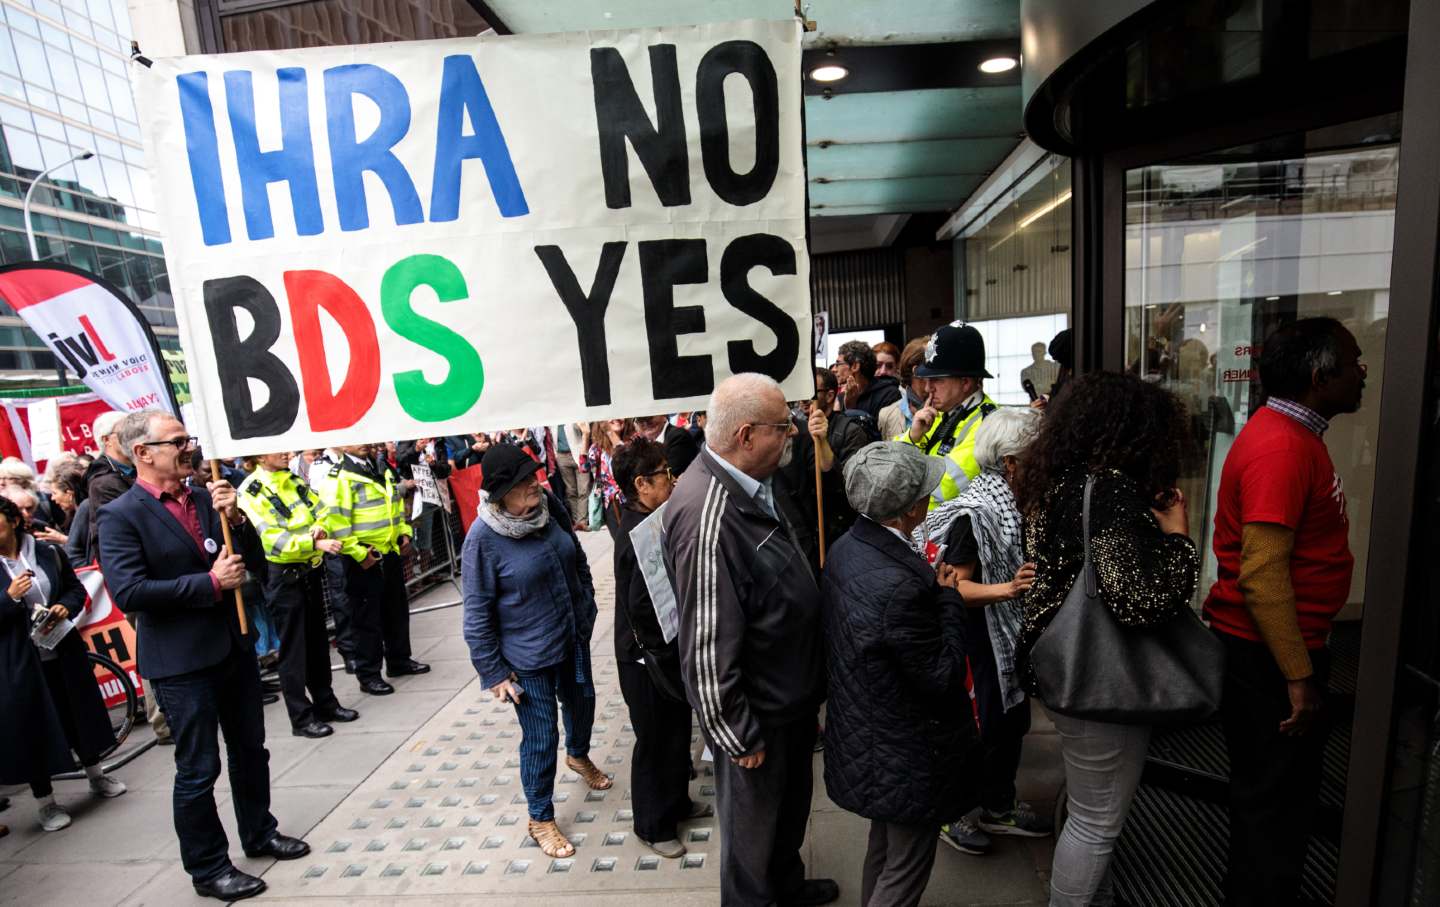 Protesters demonstrate outside a meeting of the National Executive of Britain’s Labour Party on September 4, 2018, in London, England. Labour’s NEC meets today to vote on whether to adopt the full International Holocaust Remembrance Alliance definition of antisemitism.